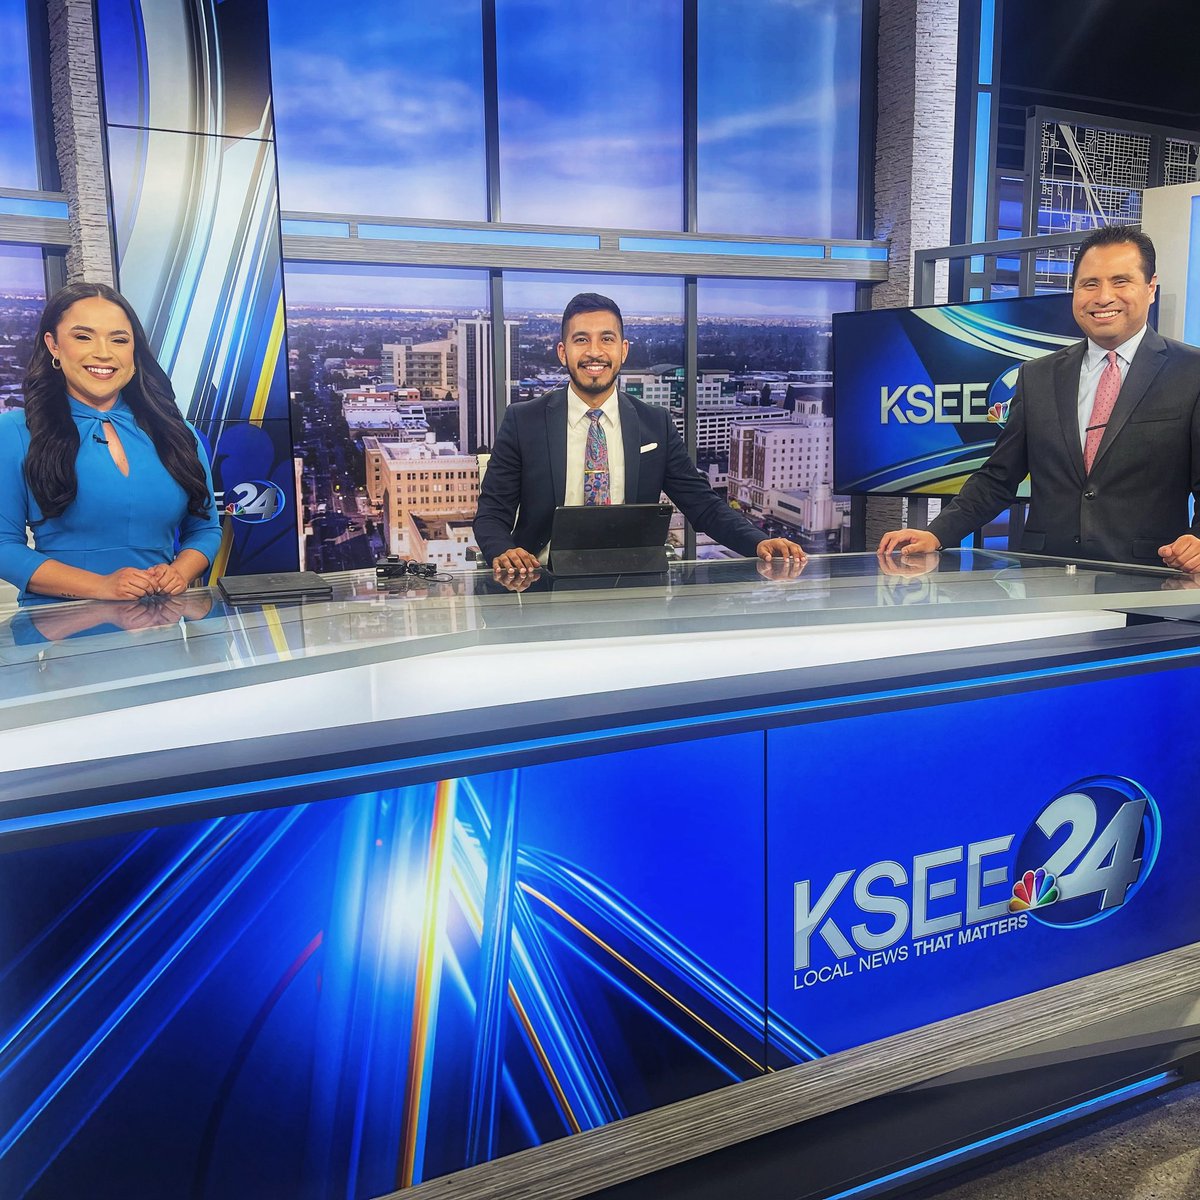 How often does this happen? Both @reynosotv and @vivianayvonnetv joined me in the studio for @ksee24 Midday on this Friday. #tvnews #thatnewslife #anchors #news #weather #newsies #Fresno #CentralValley #California @thatnewslife